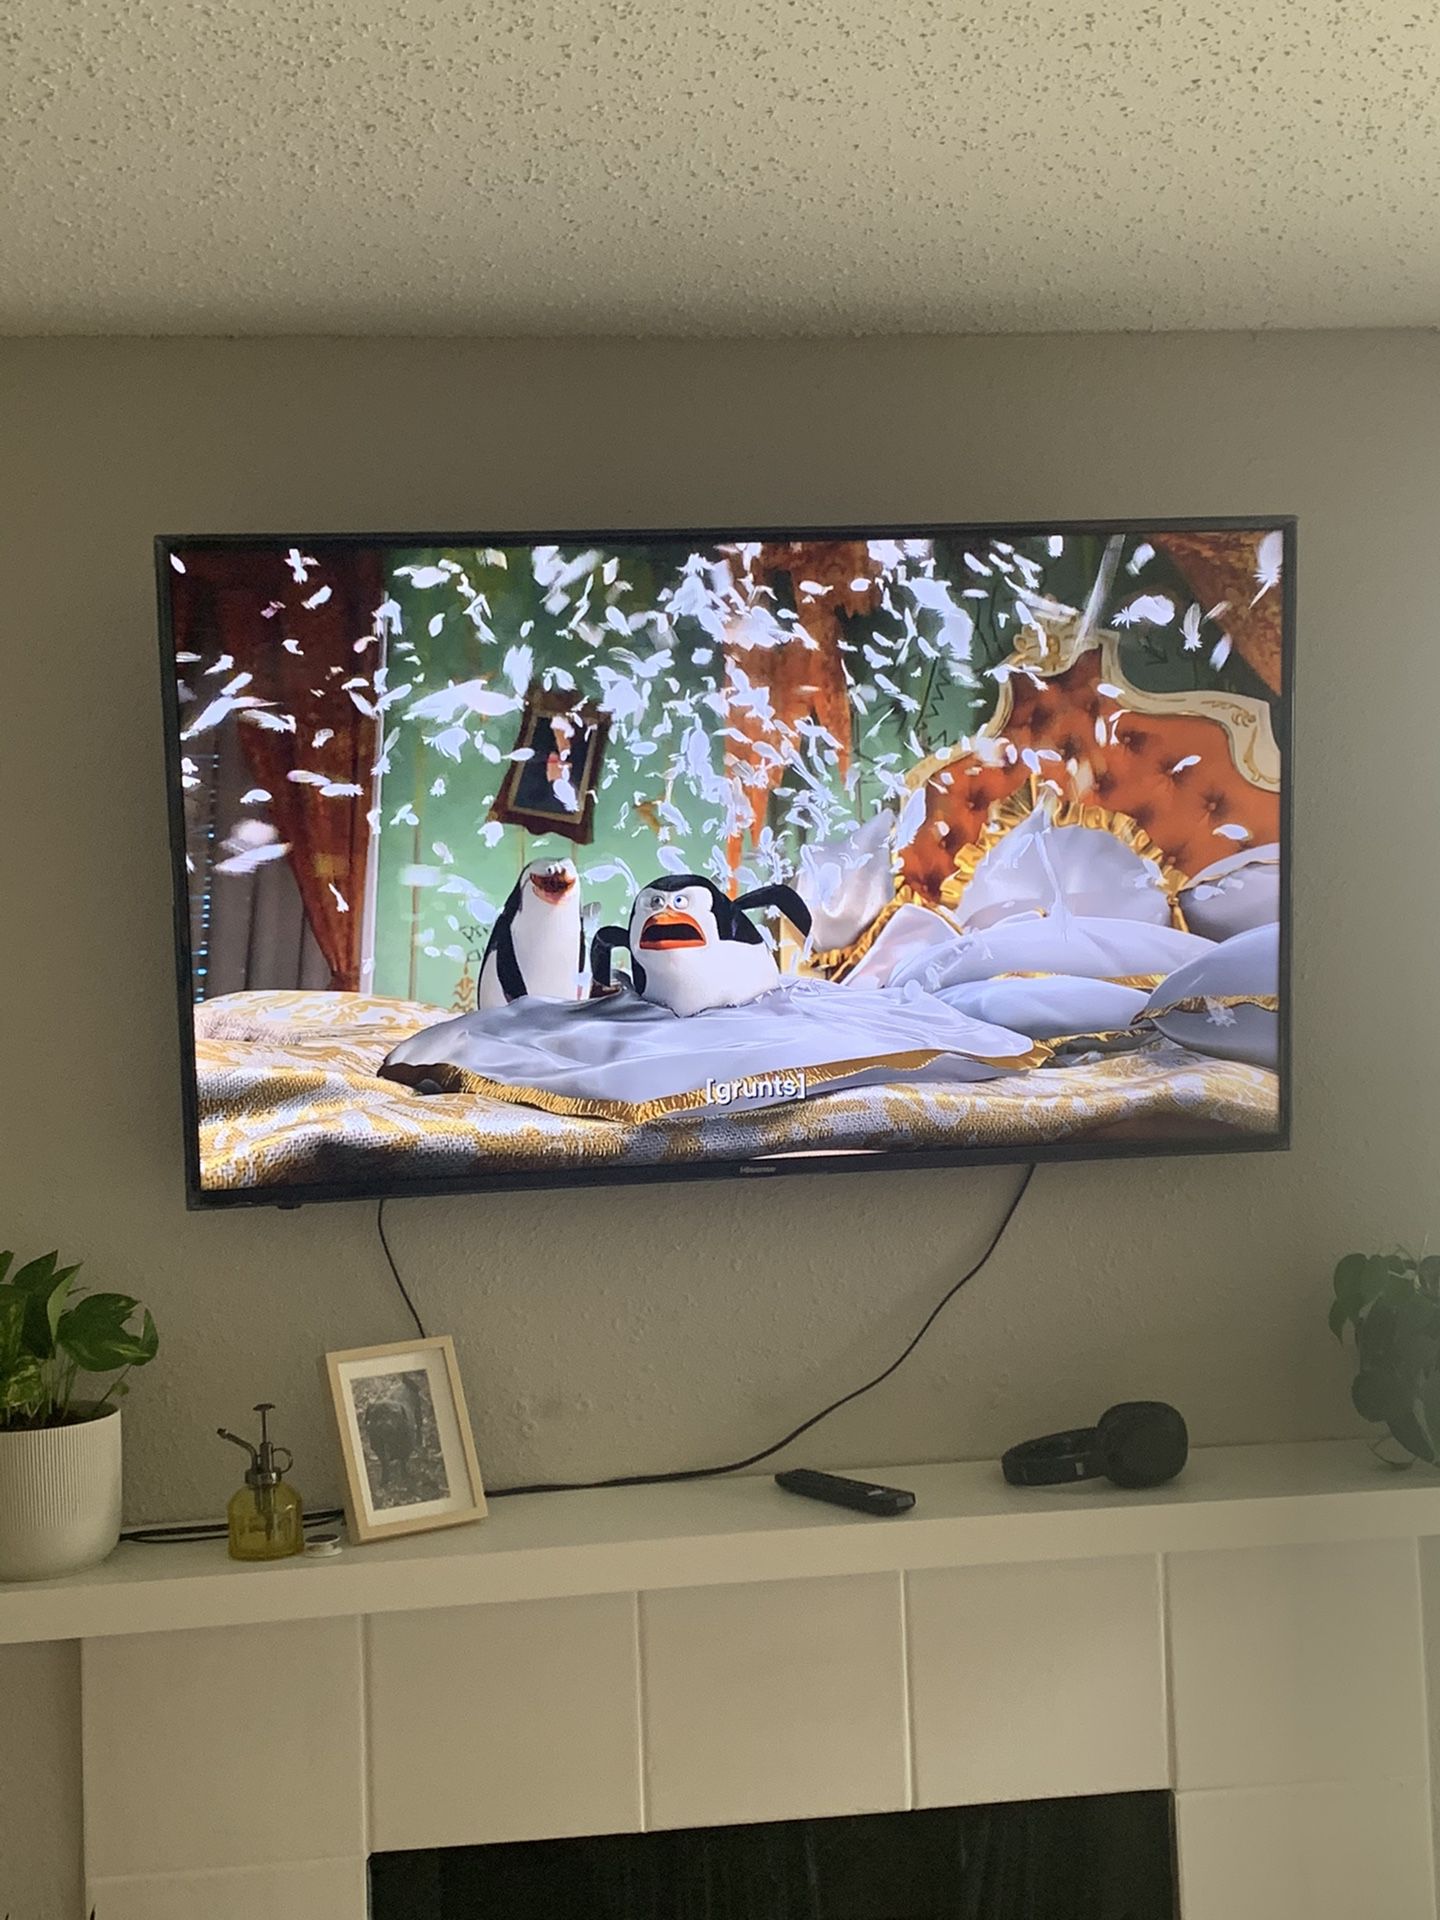 55 inch Hisense with wall mount